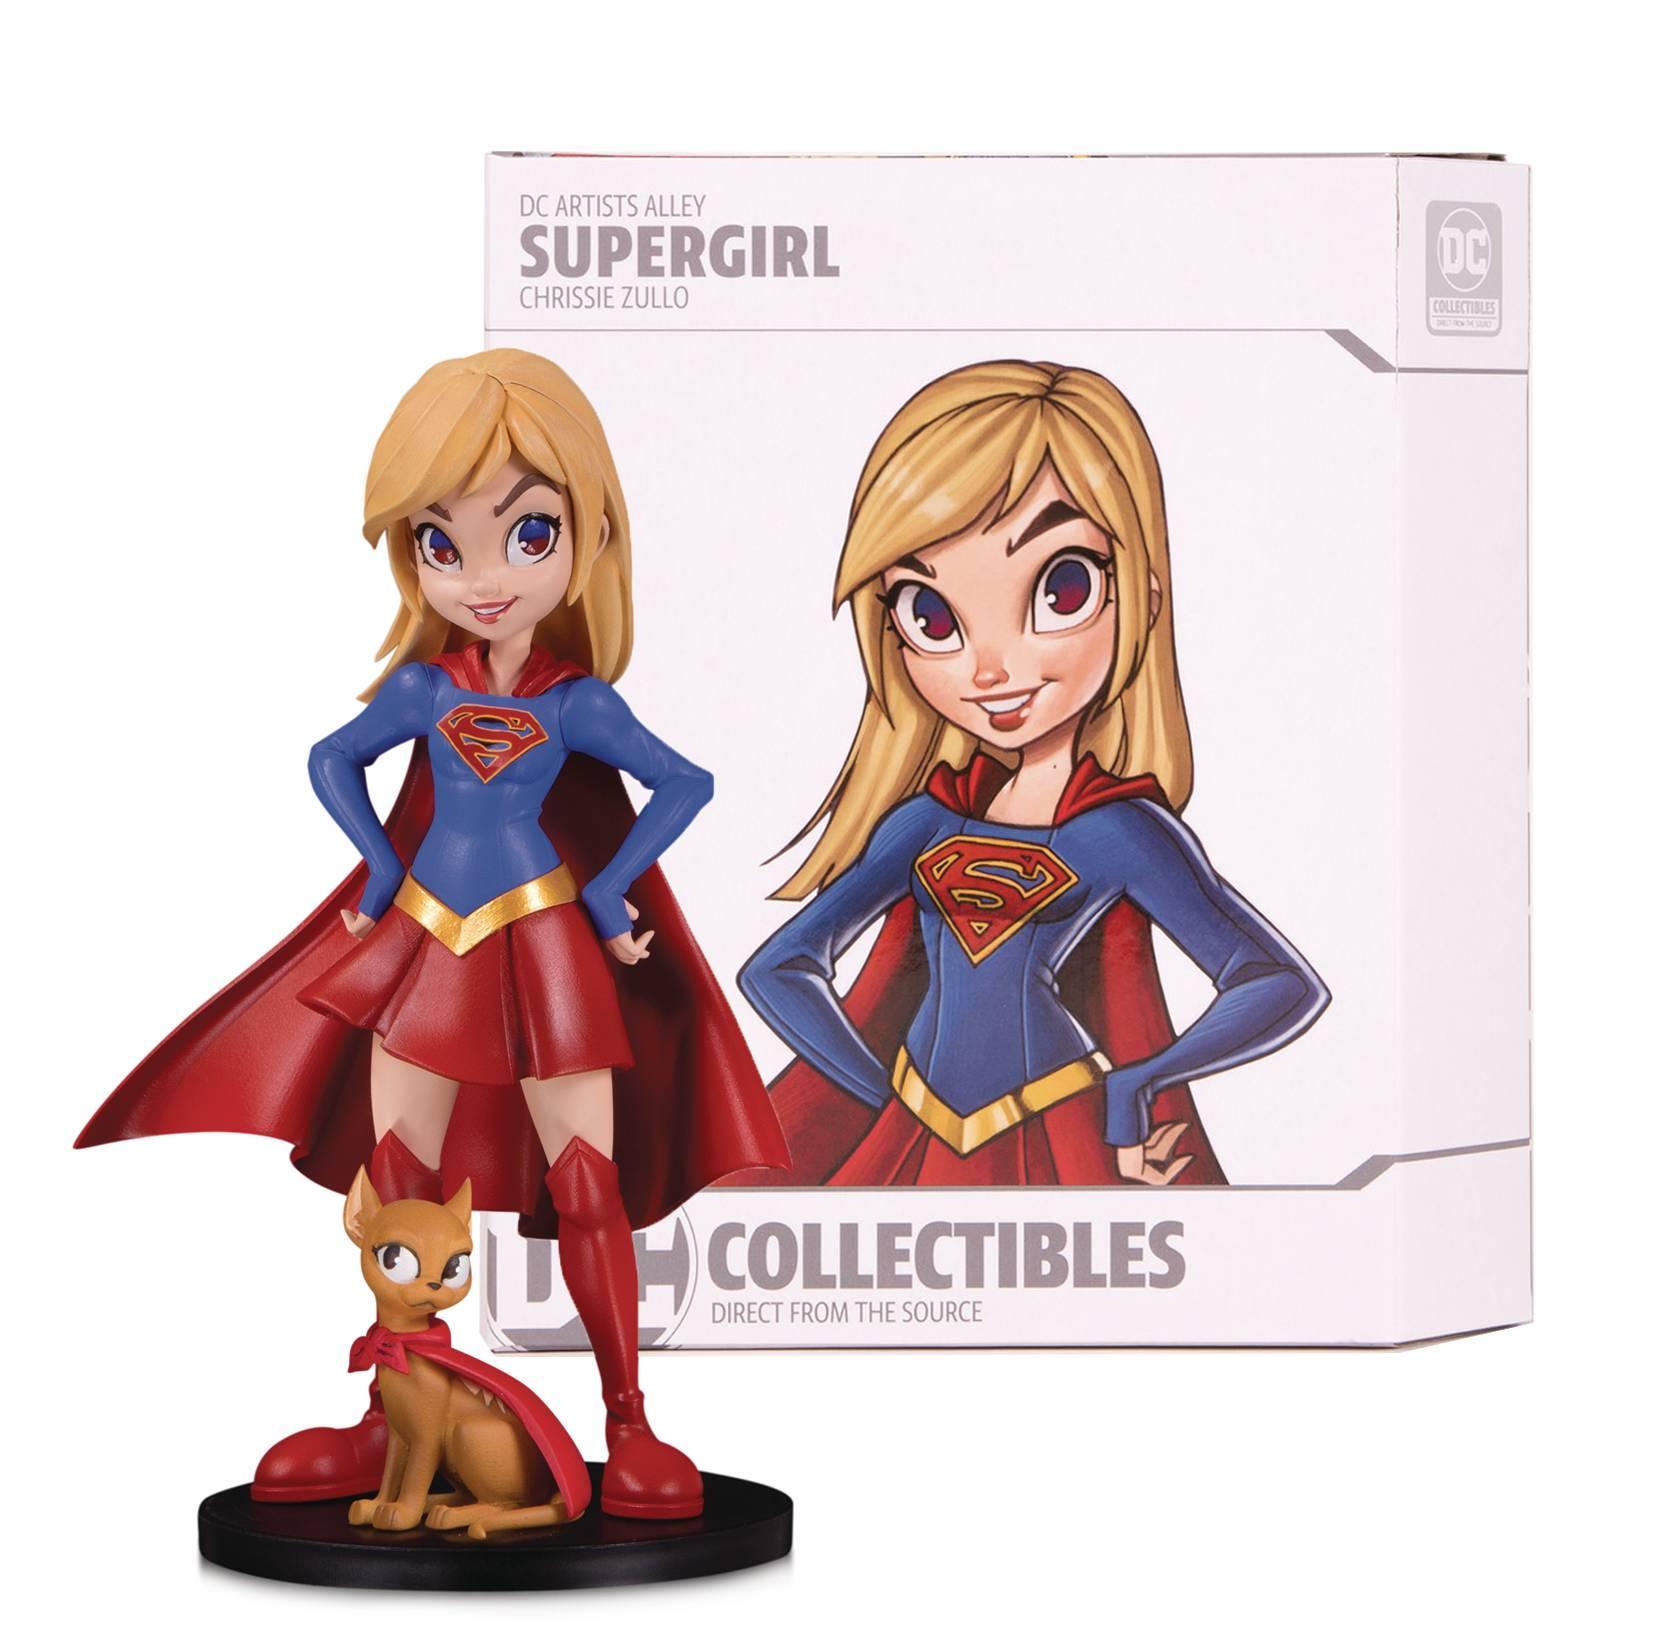 DC ARTISTS ALLEY SUPERGIRL BY ZULLO PVC FIGURE - Kings Comics